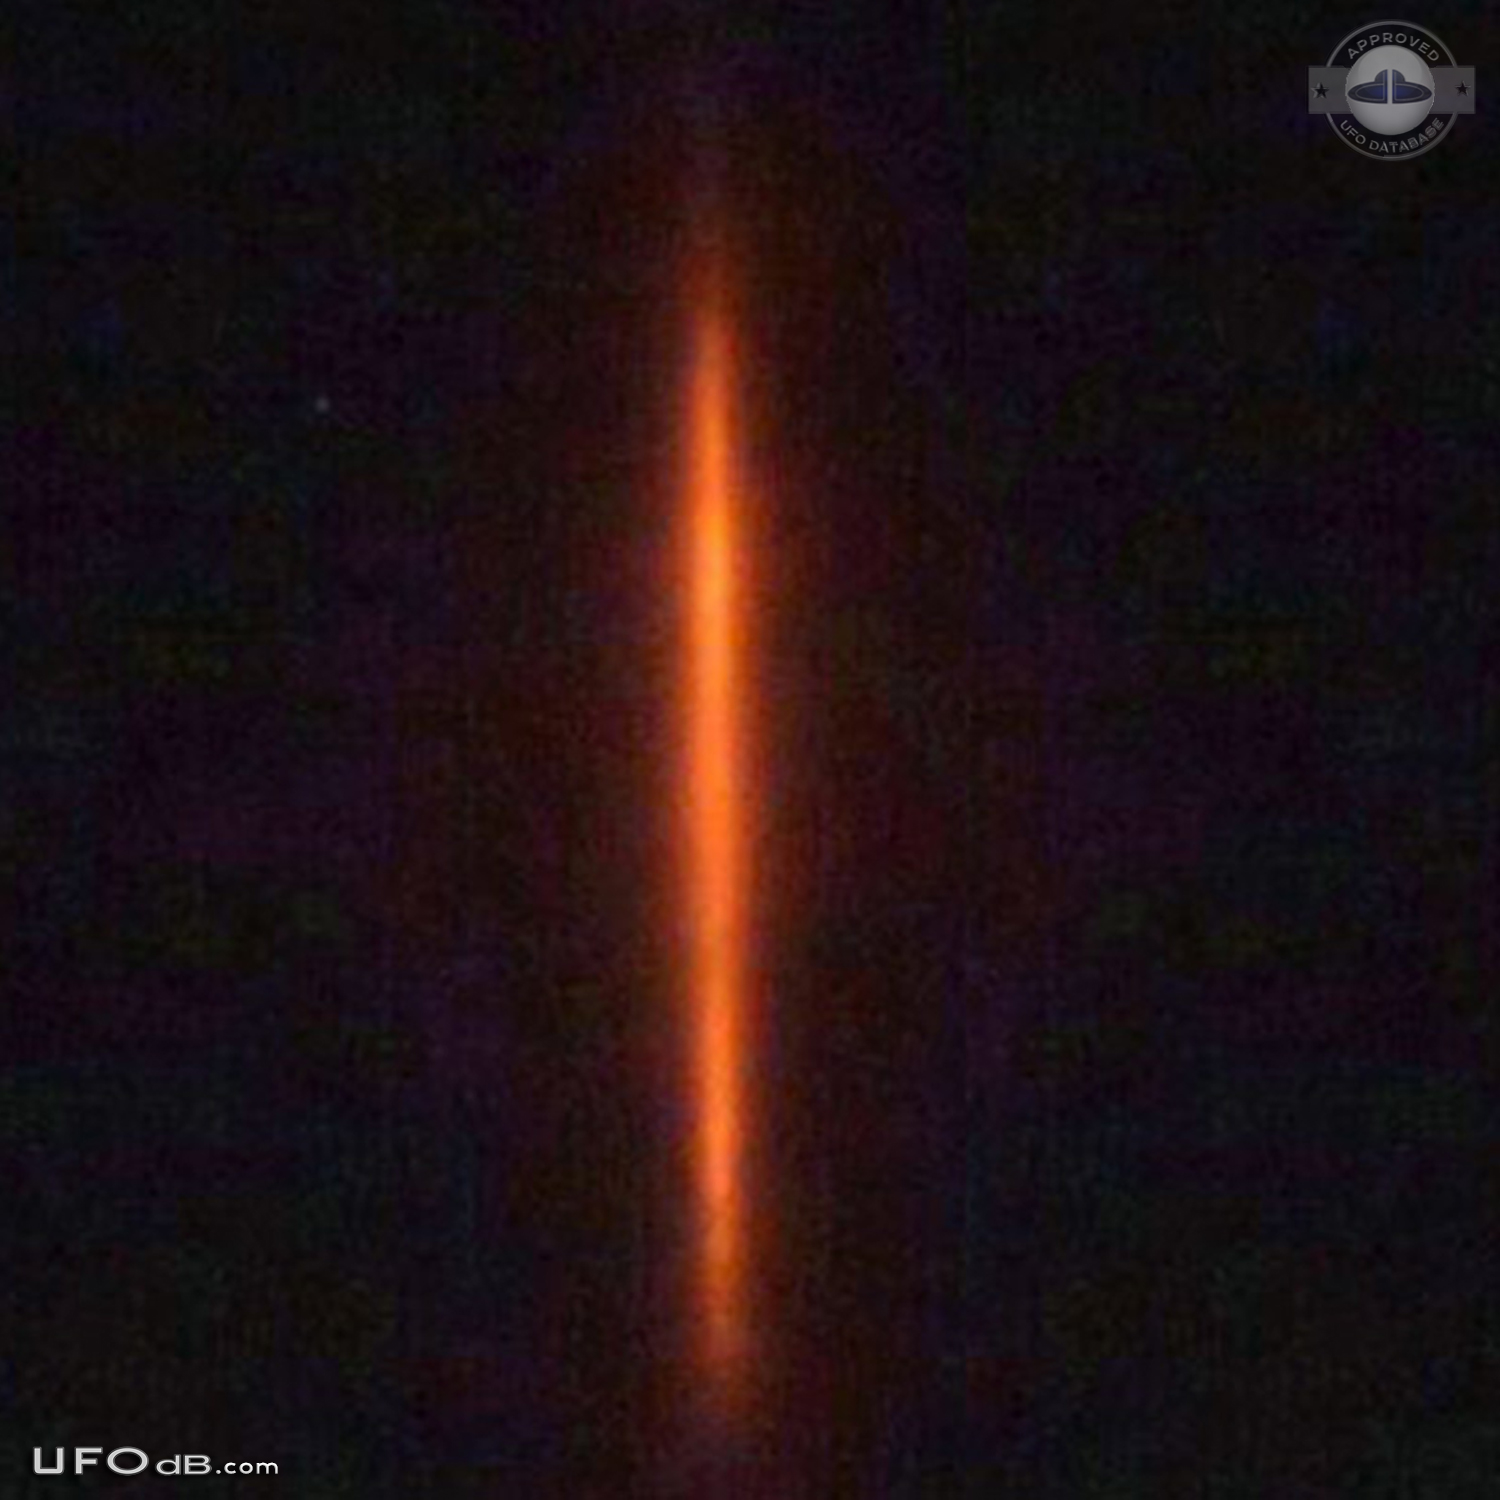 Red light mystery UFO gets the News in Penampang, Malaysia 2014 UFO Picture #588-6